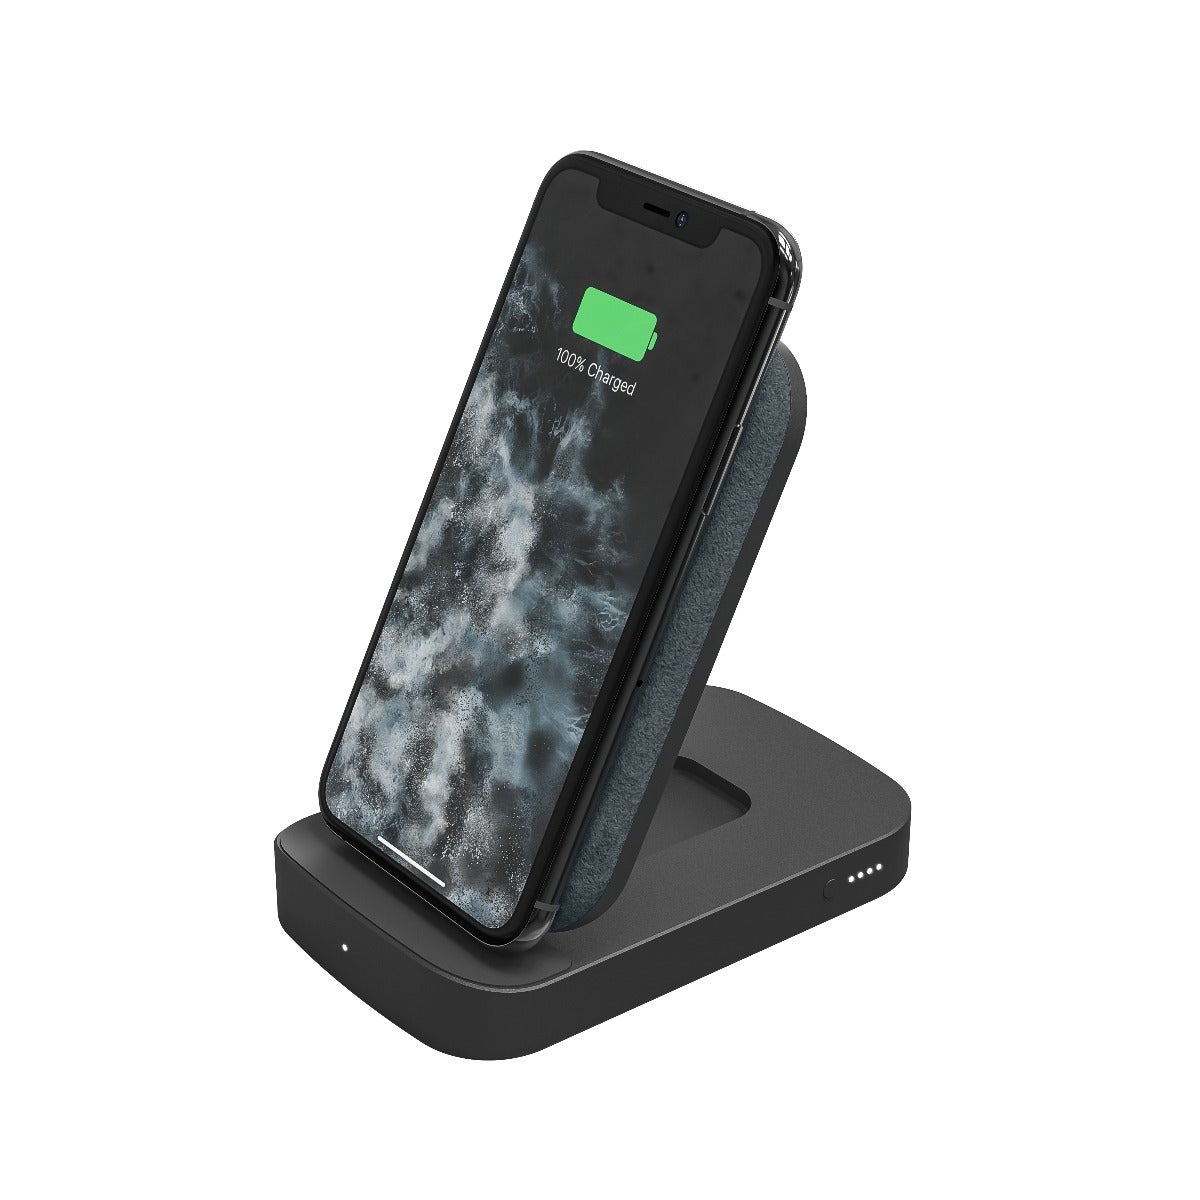 Mophie Announces New Powerstation Universal Batteries With PD Fast Charging